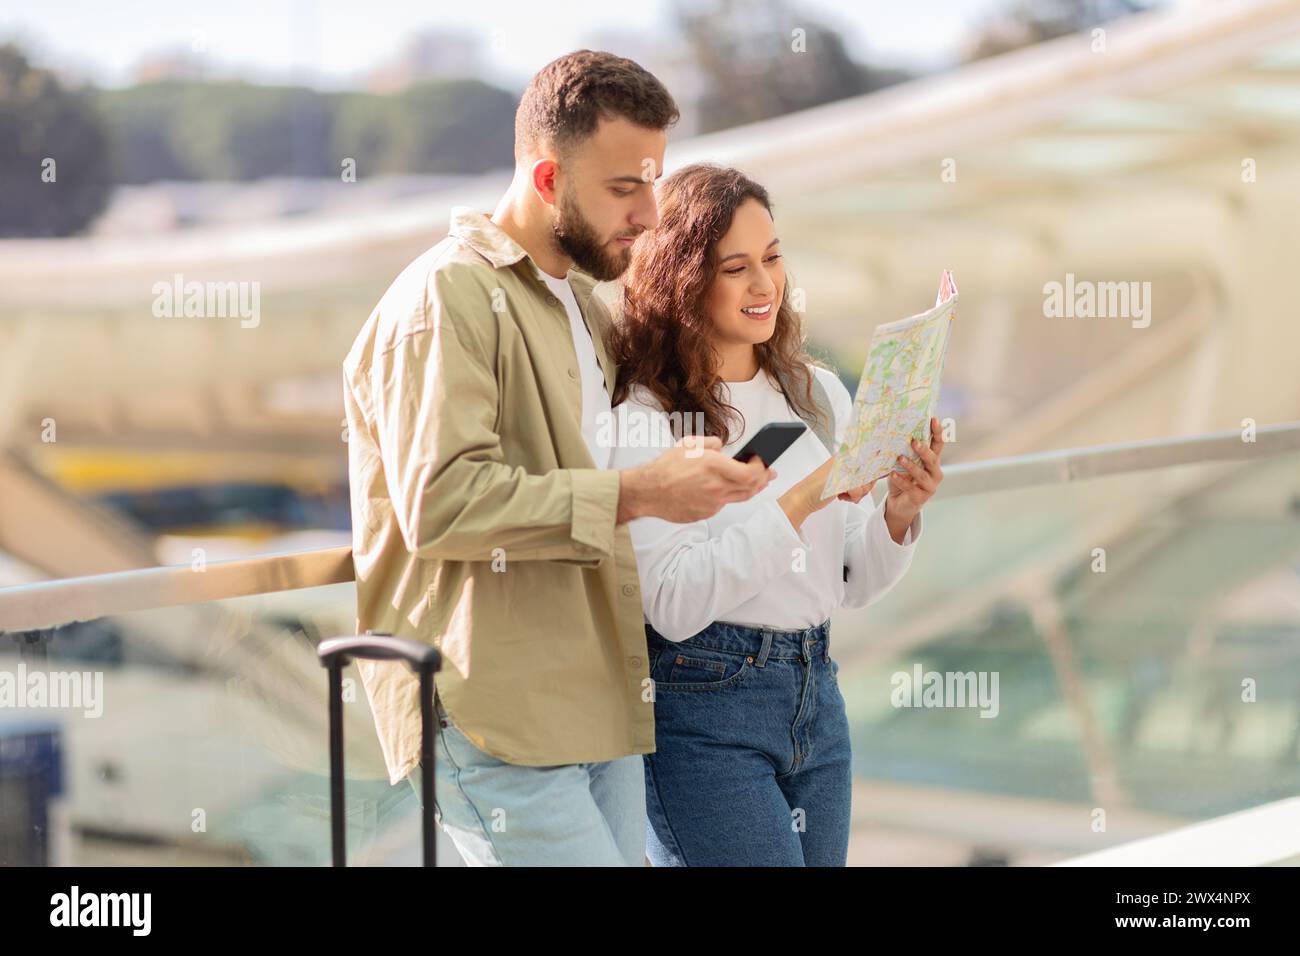 Couple reading map and using phone together Stock Photo